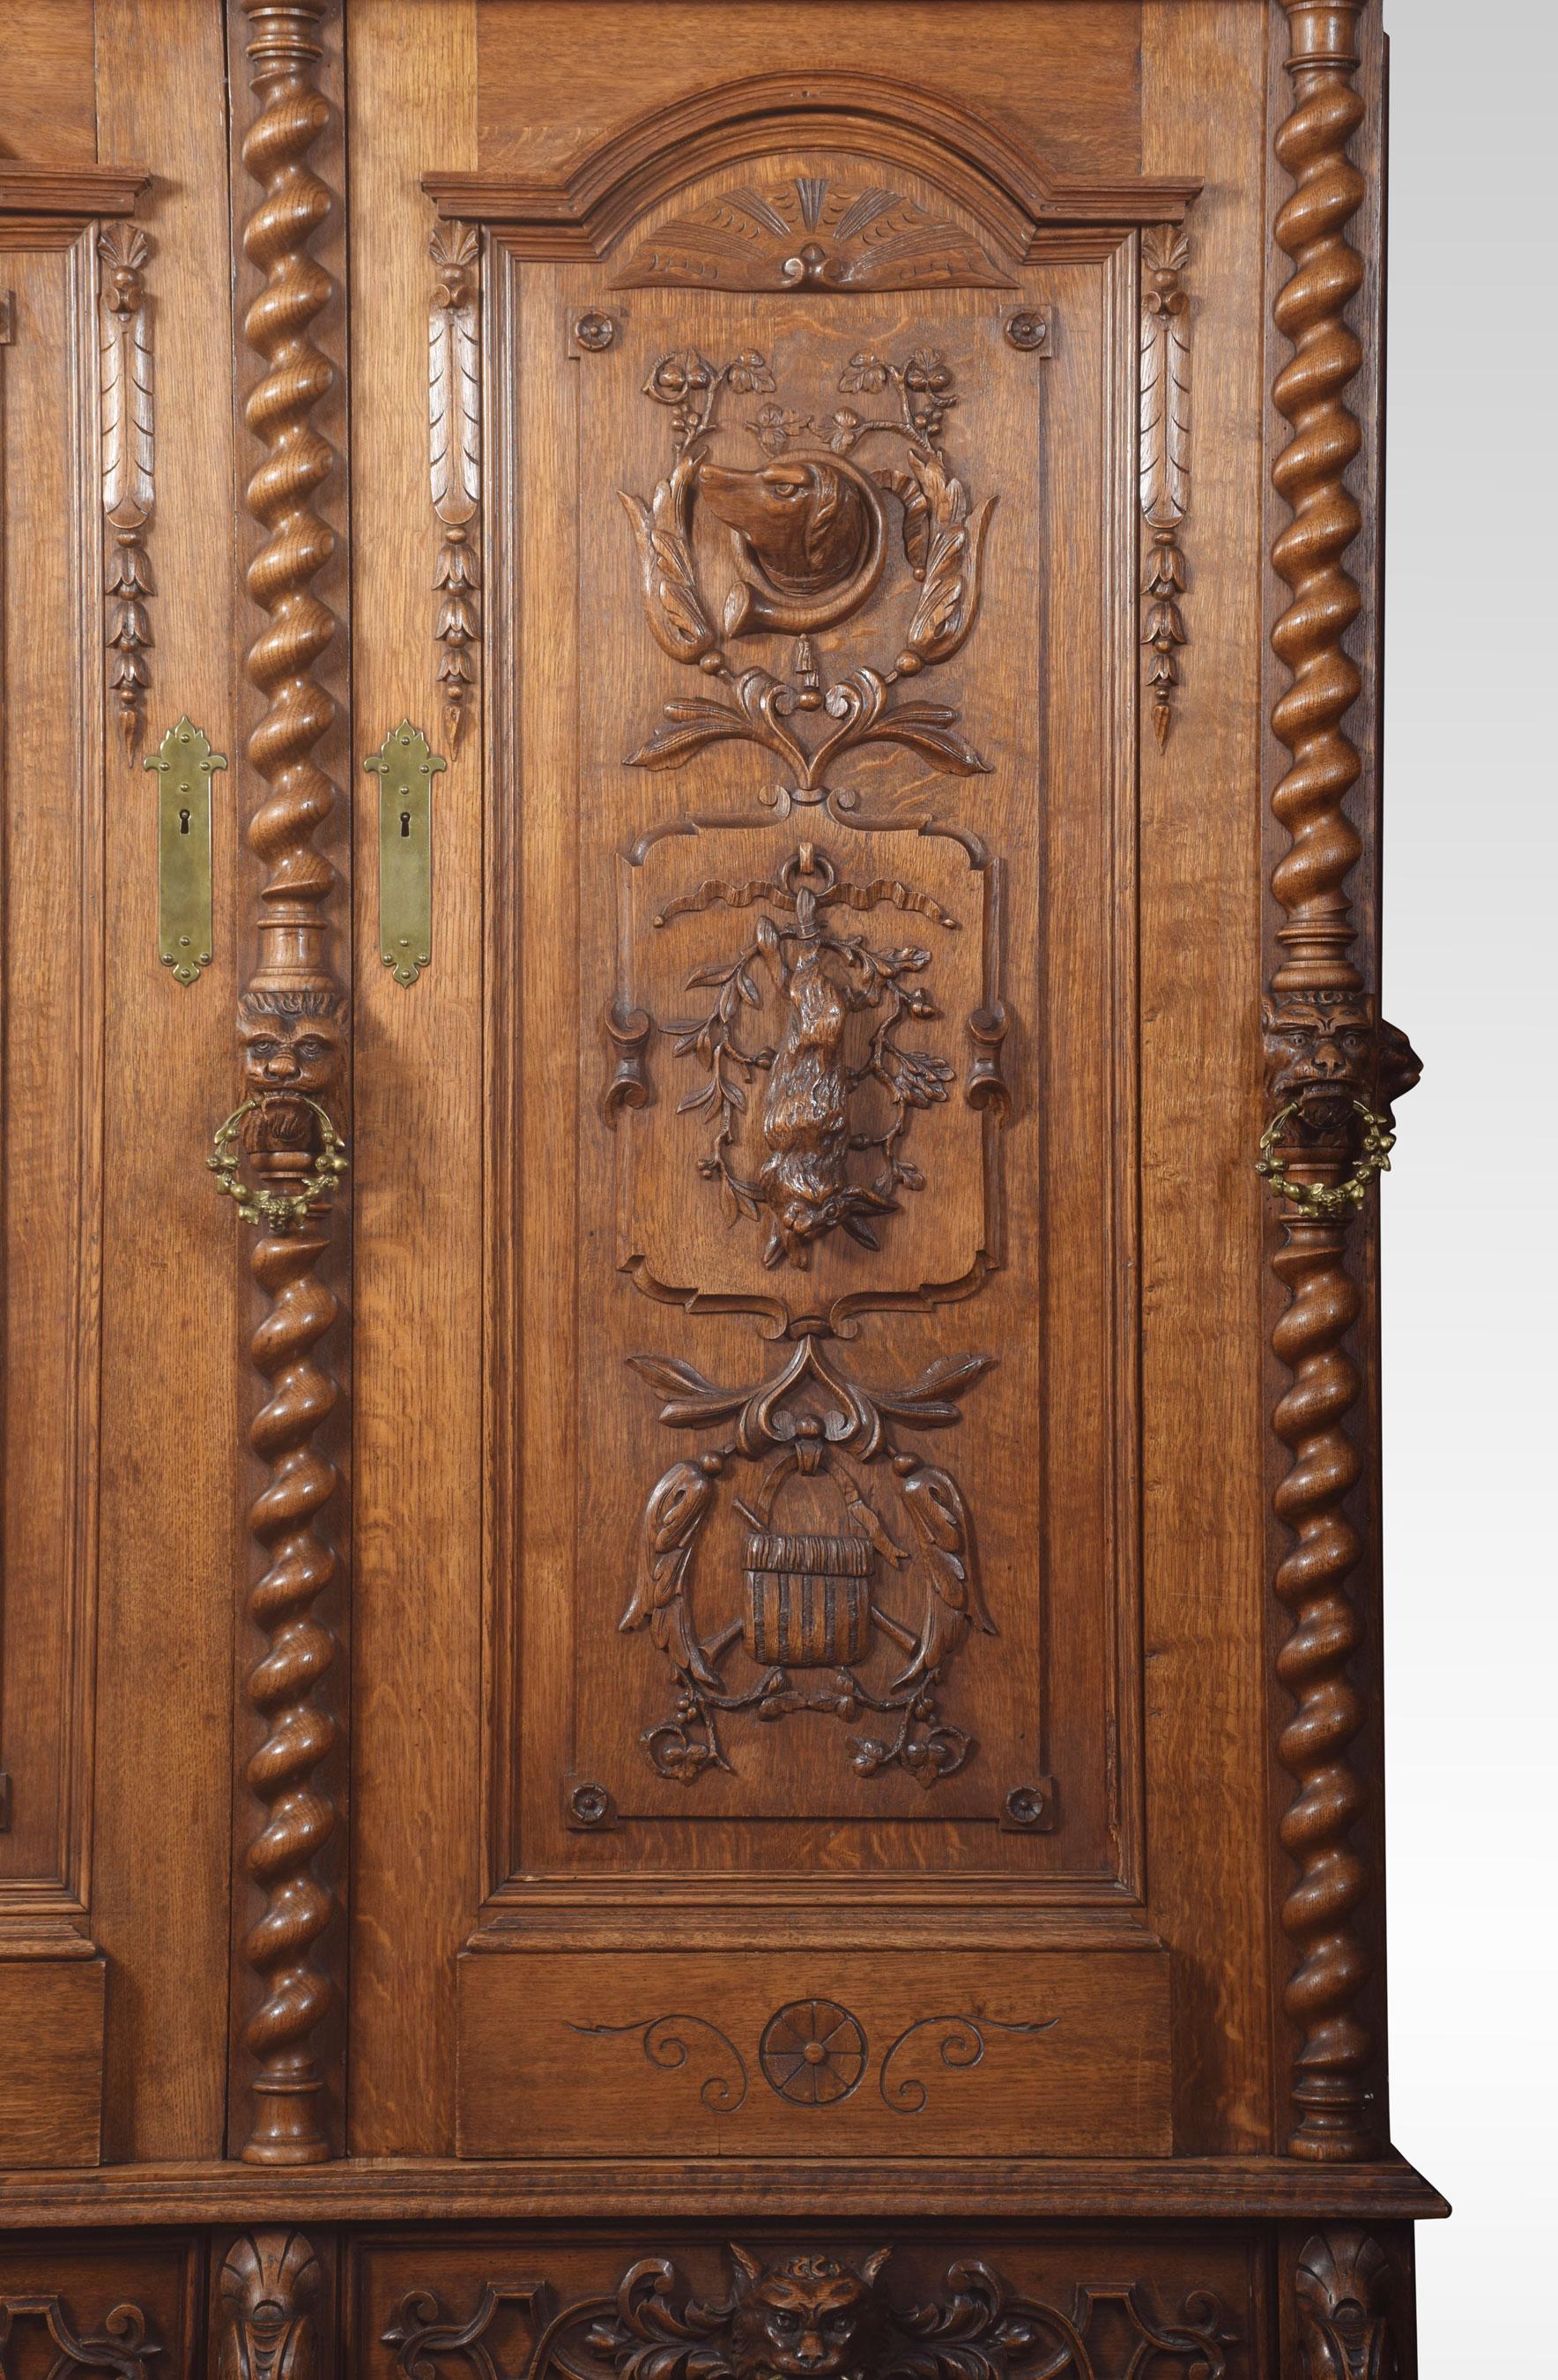 Substantial 19th century oak cabinet, The projecting moulded cornice with egg and dart moulding over a pair of panelled doors with overall carved relief of hanging game, hounds, lion masks and further geometric detail. Opening to reveal four